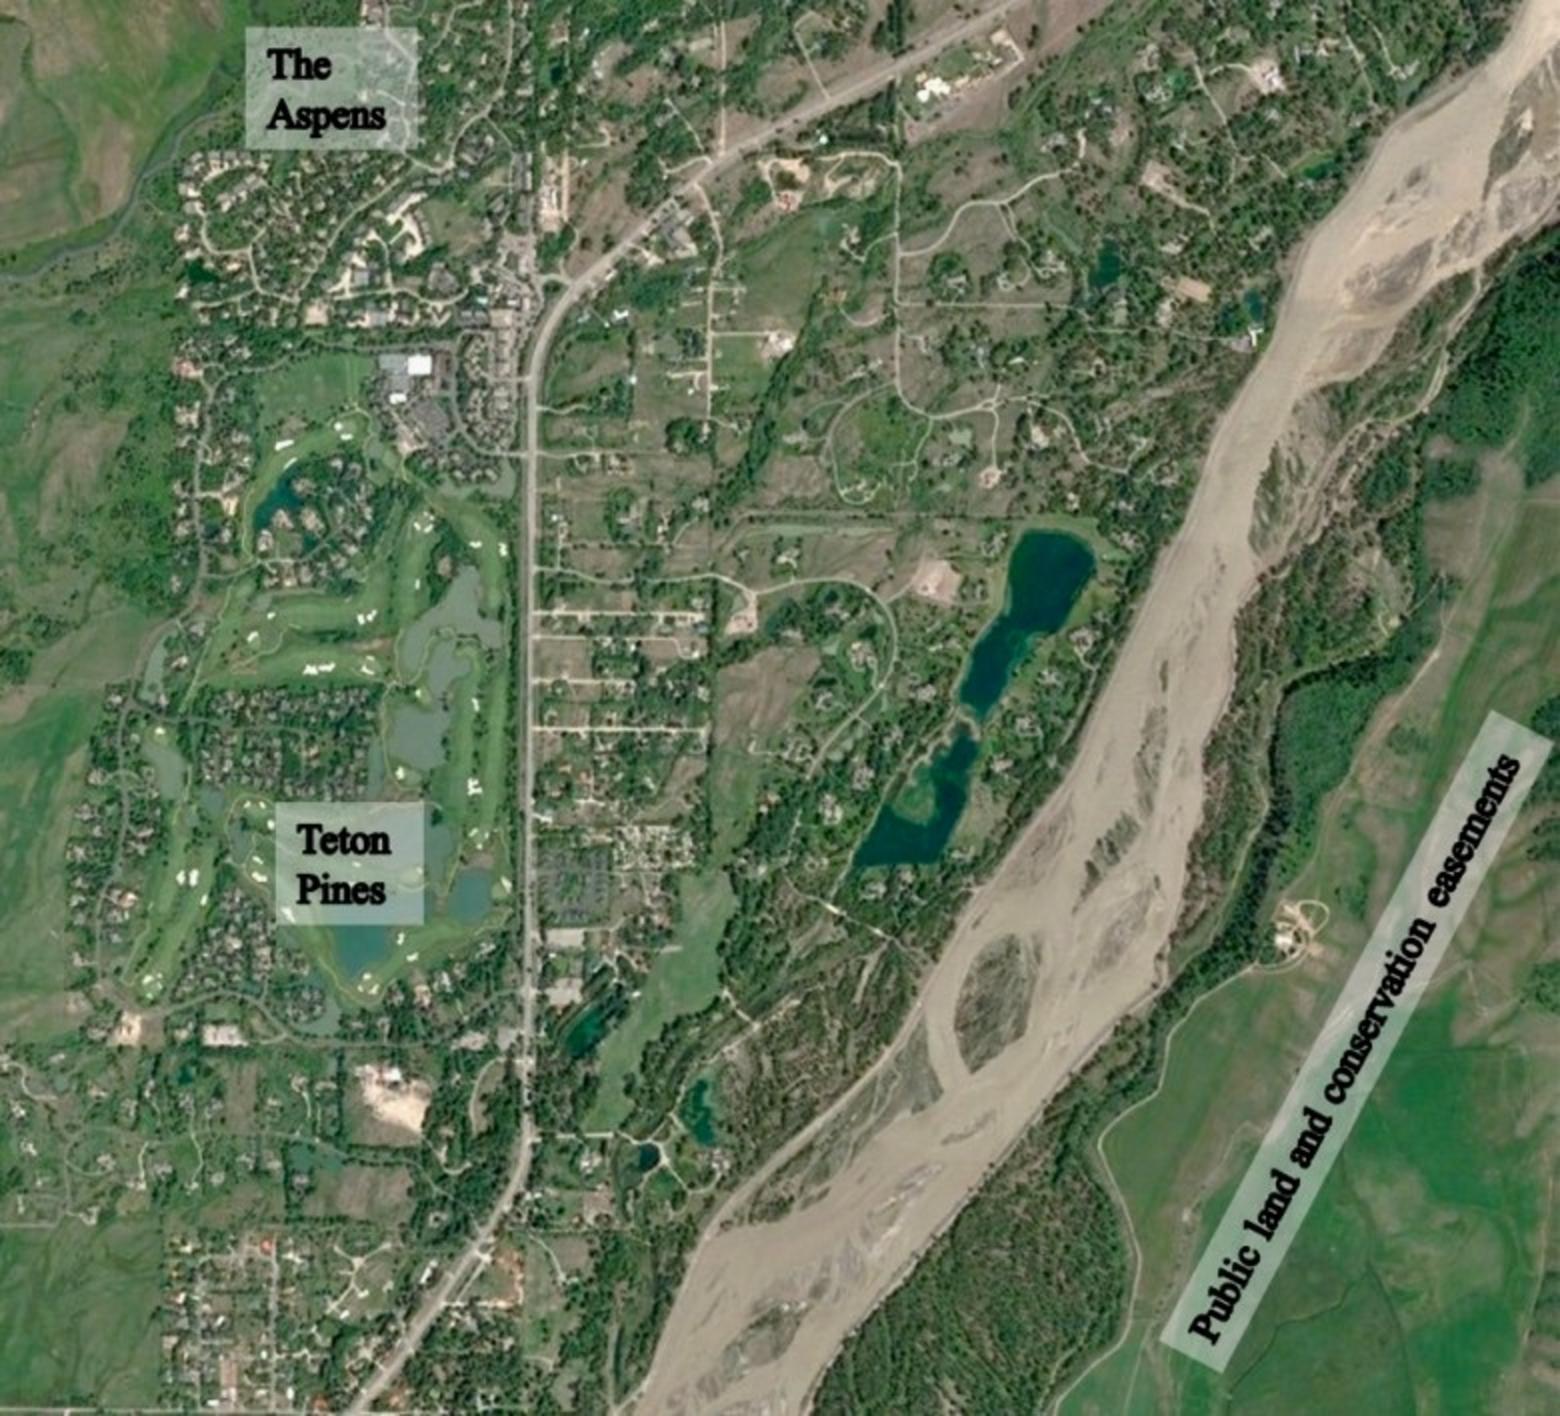 What does suburban/exurban sprawl look like in a valley like Jackson Hole famous for its wildlife and a county—Teton, Wyo—routinely among the richest per capita in America? Photos above are of the west side of the Snake River of a few decades. The landscape transformation from it being rural with ranches and low numbers of people and structures to being coated with structures is how an area conducive to safe wildlife travel is now deadly and a hazard for bears.  GoogleEarth images courtesy Susan Marsh